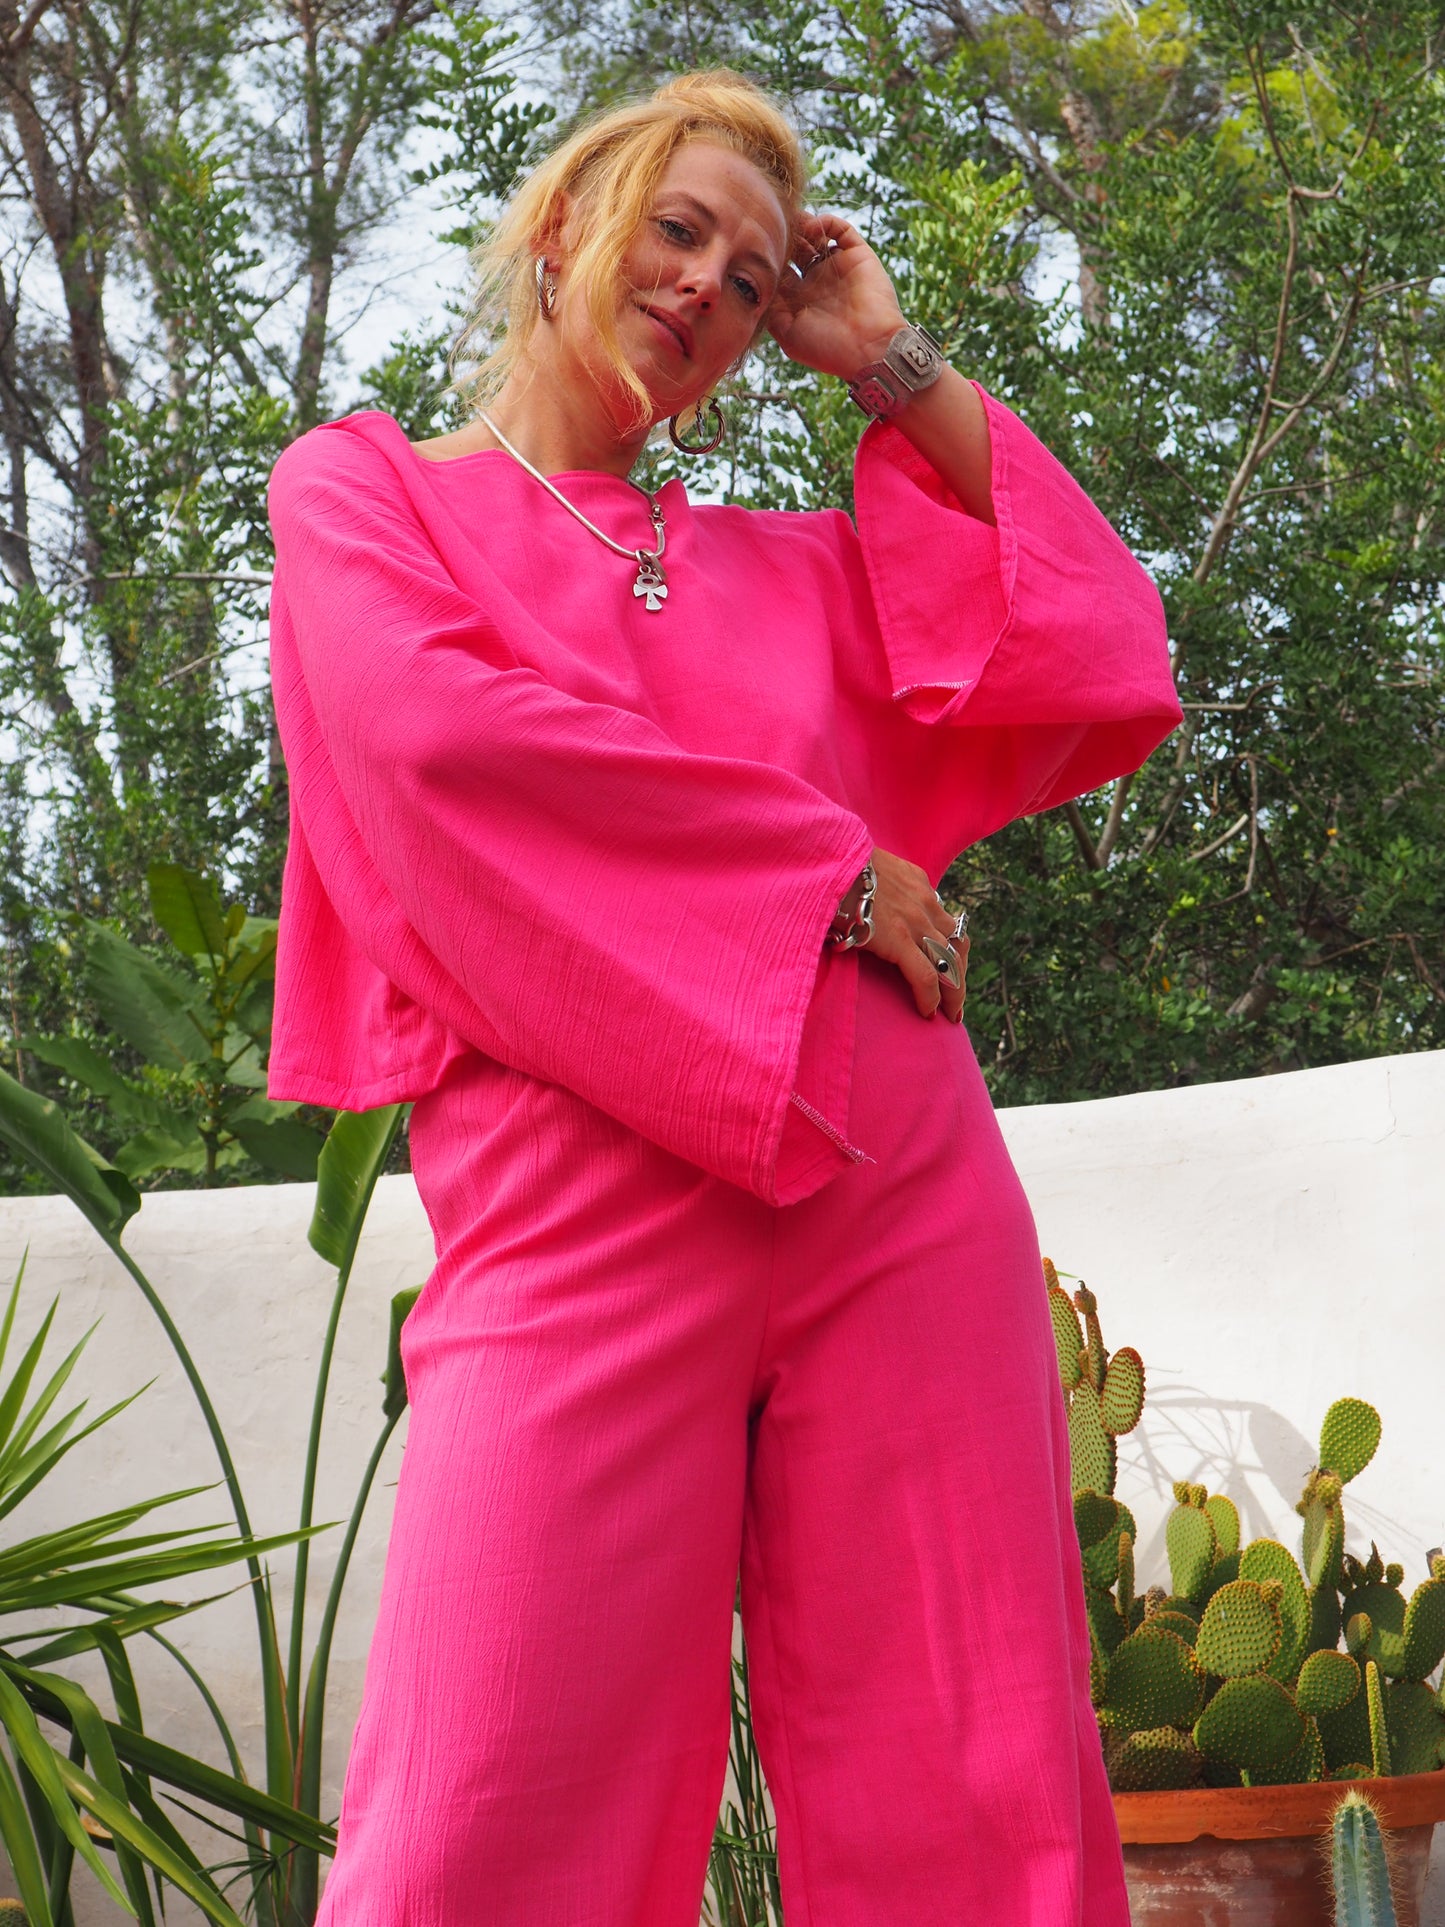 Bright bright pink elasticated waist wide leg pants made by Vagabond Ibiza top is now sold